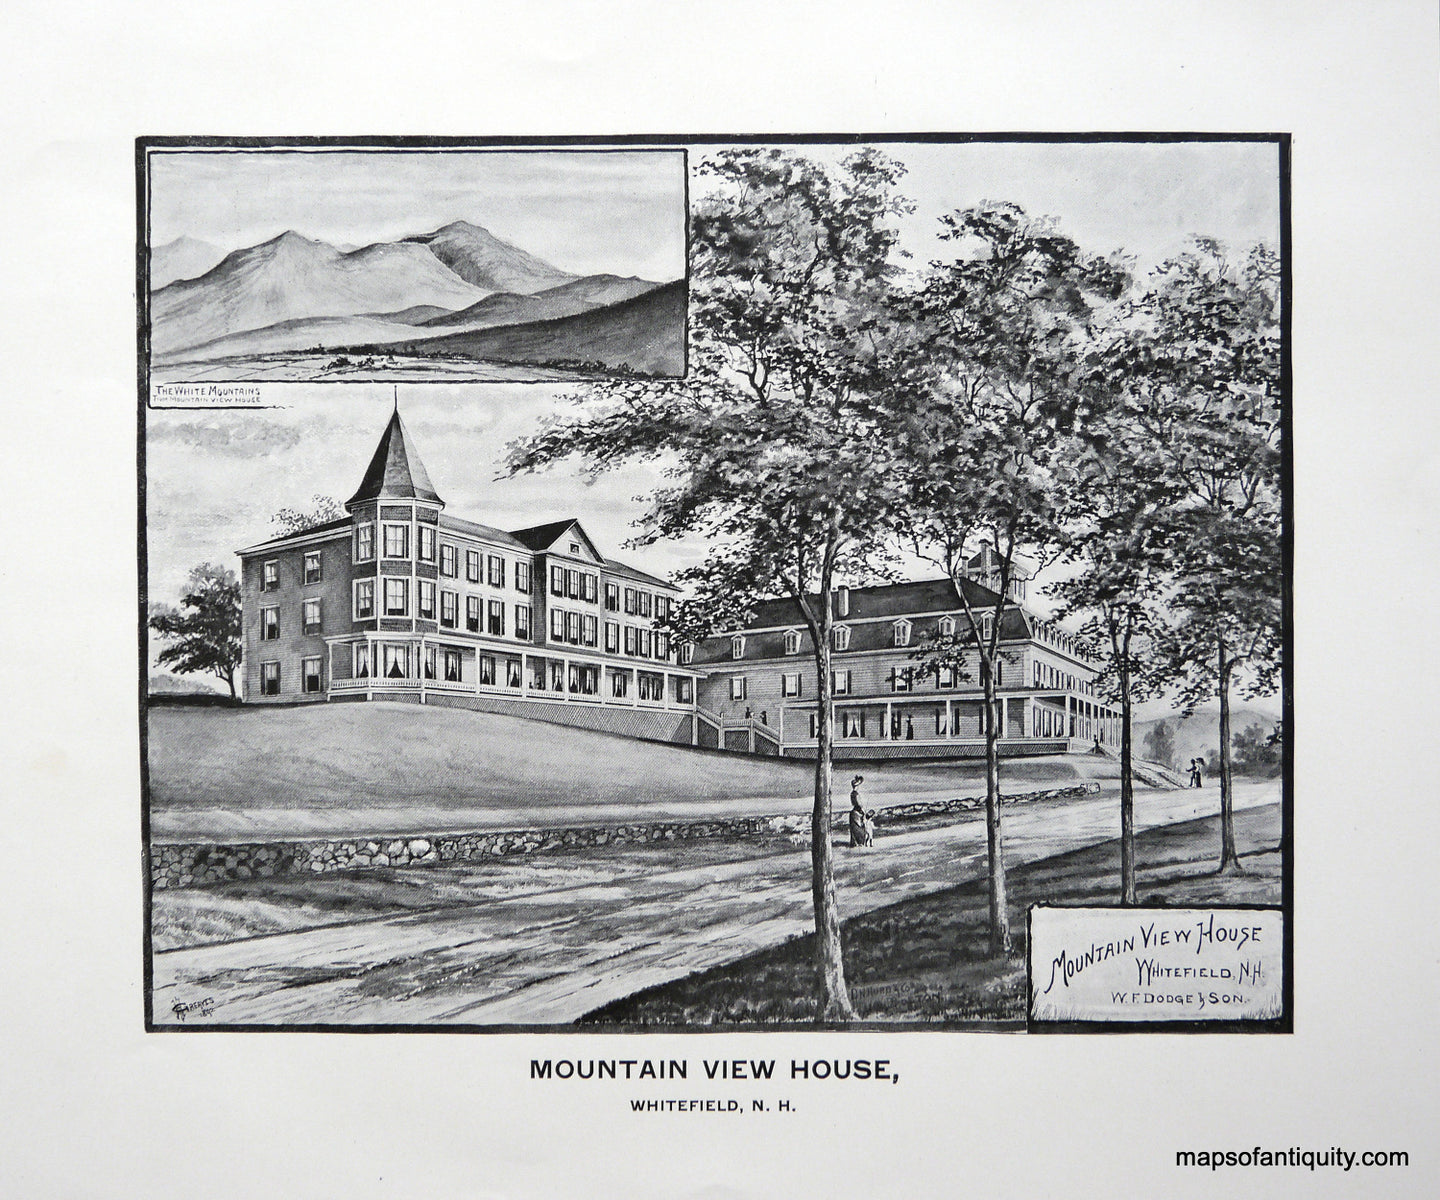 Antique-Illustration-Mountain-View-House-Whitefield-N.H.-New-Hampshire--1892-Hurd-Maps-Of-Antiquity